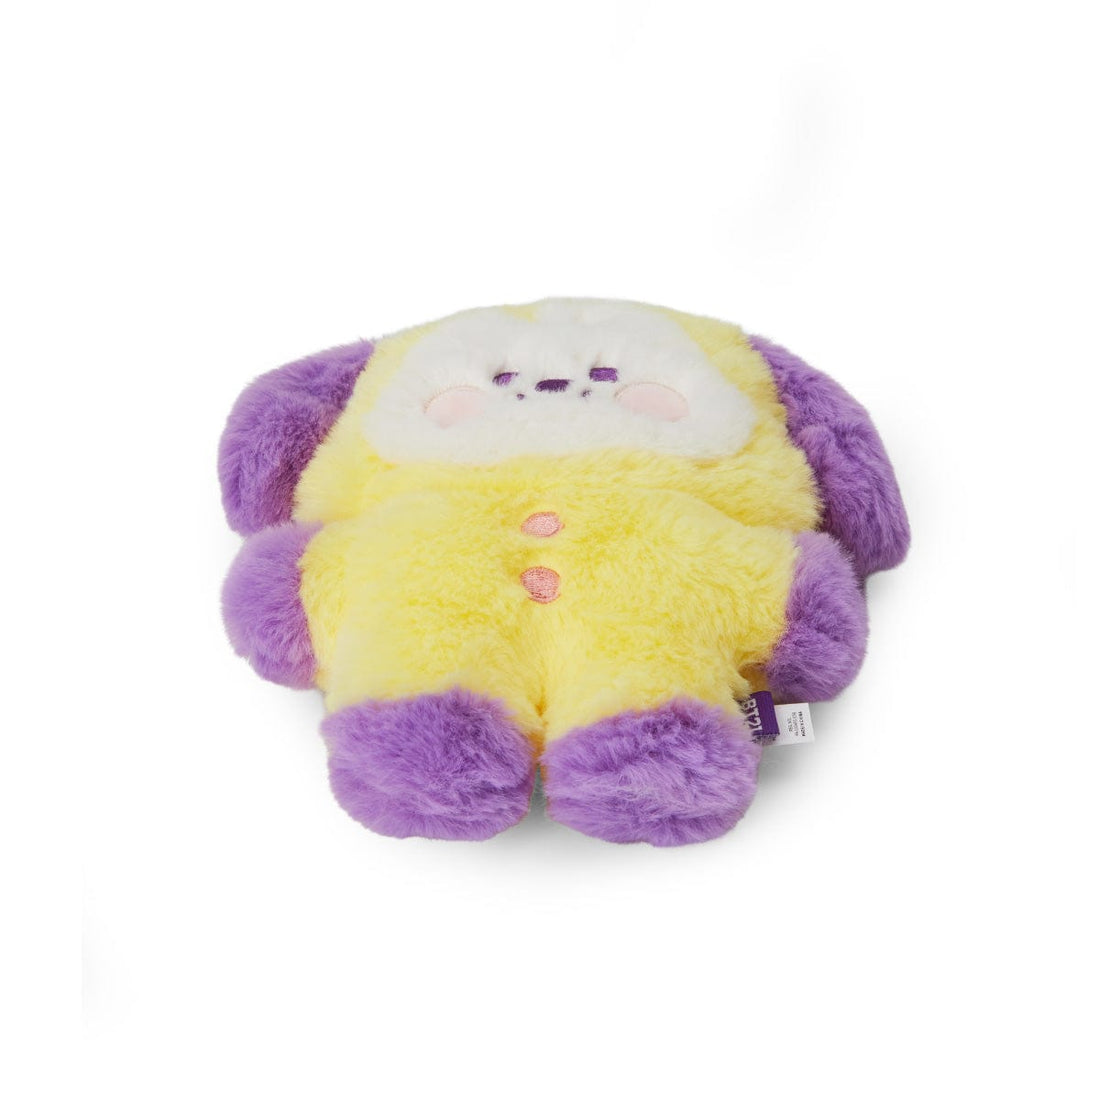 BT21 TOYS CHIMMY BT21 BABY CHIMMY FLAT FUR STANDING DOLL PURPLE HEART EDITION